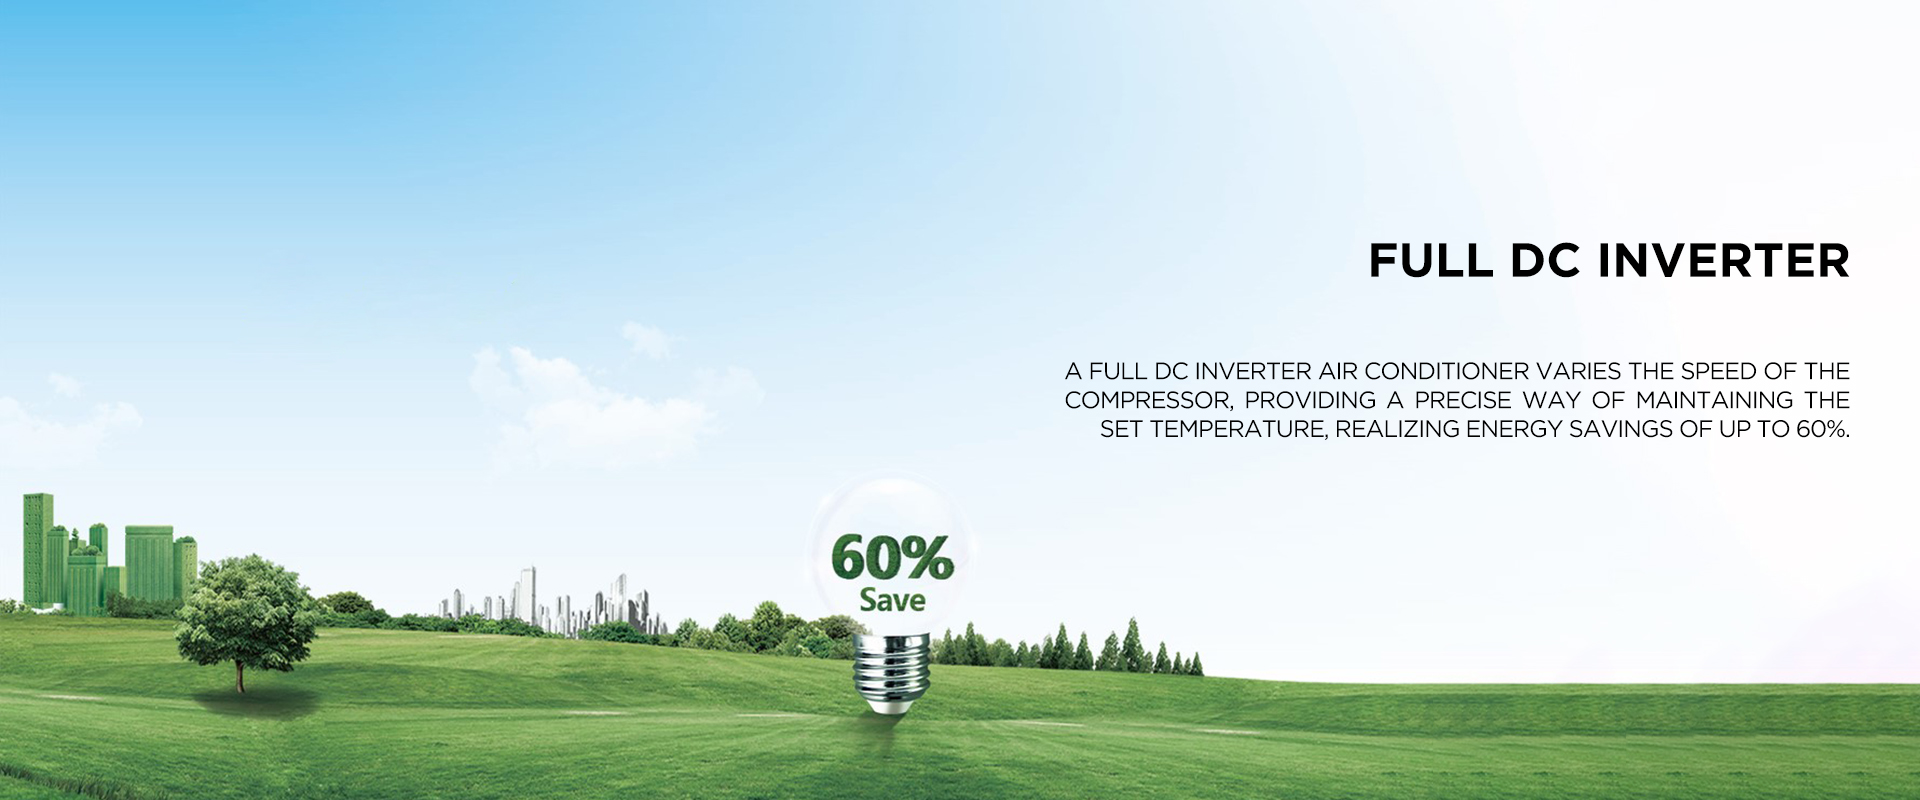 5D DC INVERTER - A DC inverter air conditioner varies the speed of the compressor, providing a precise way of maintaining the set temperature, realizing energy savings of up to 60%.